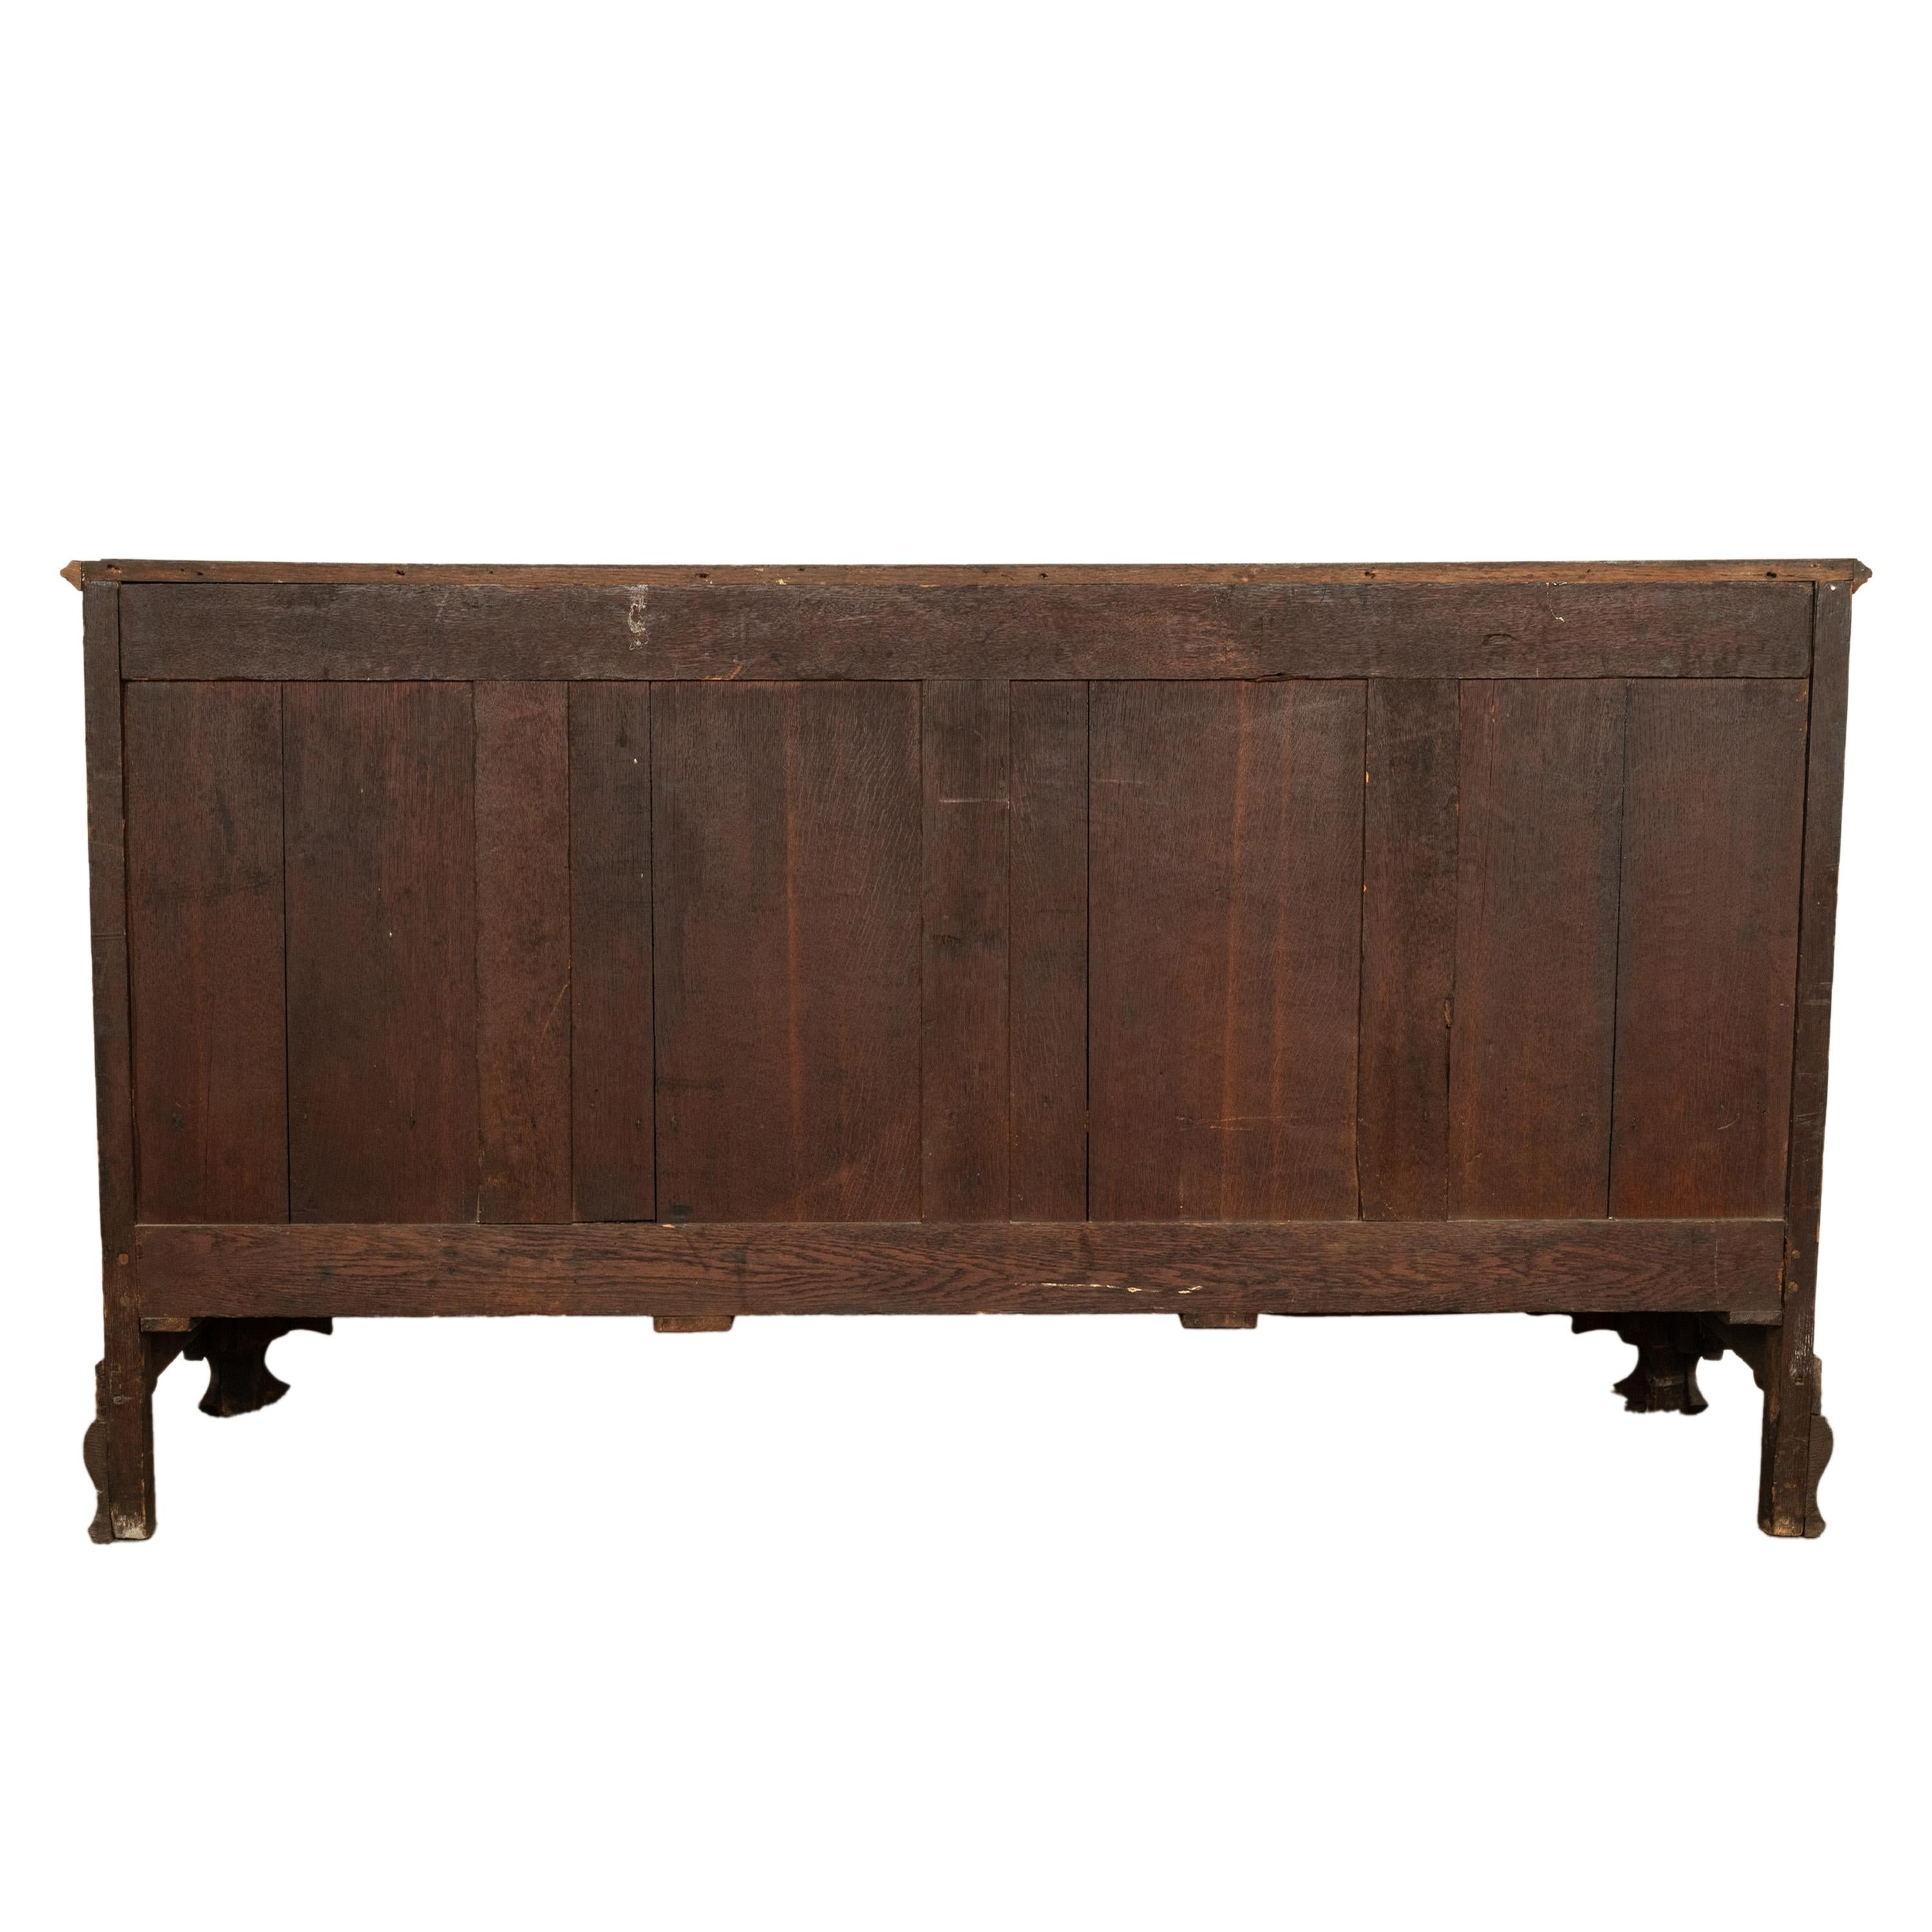 Antique 18th C Georgian Oak Mahogany Hinged Top Mule Chest Coffer Sideboard 1770 For Sale 11